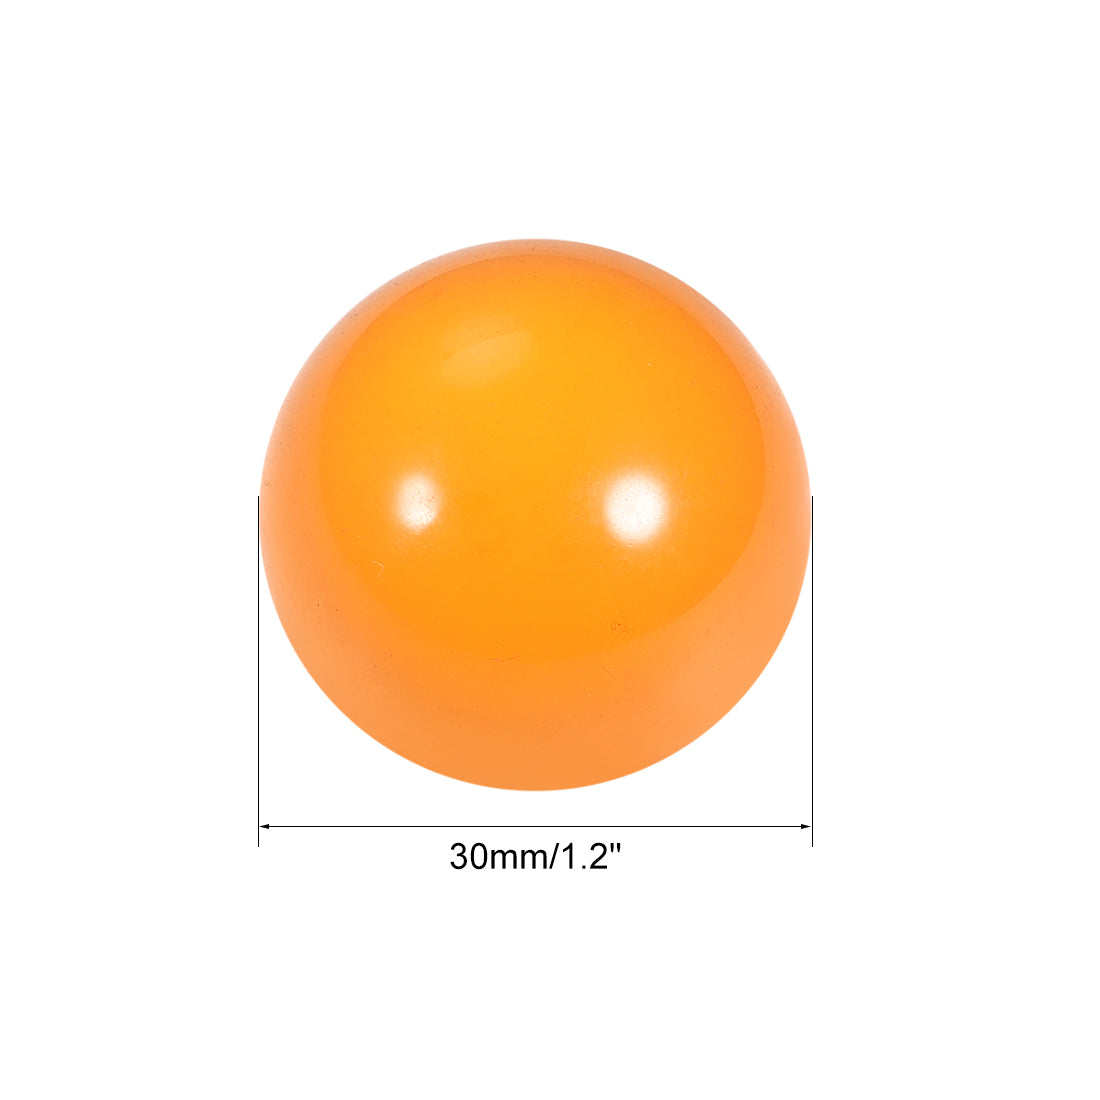 uxcell Uxcell 30mm Dia Acrylic Ball Yellow Sphere Ornament Solid Balls 1.2" 2pcs